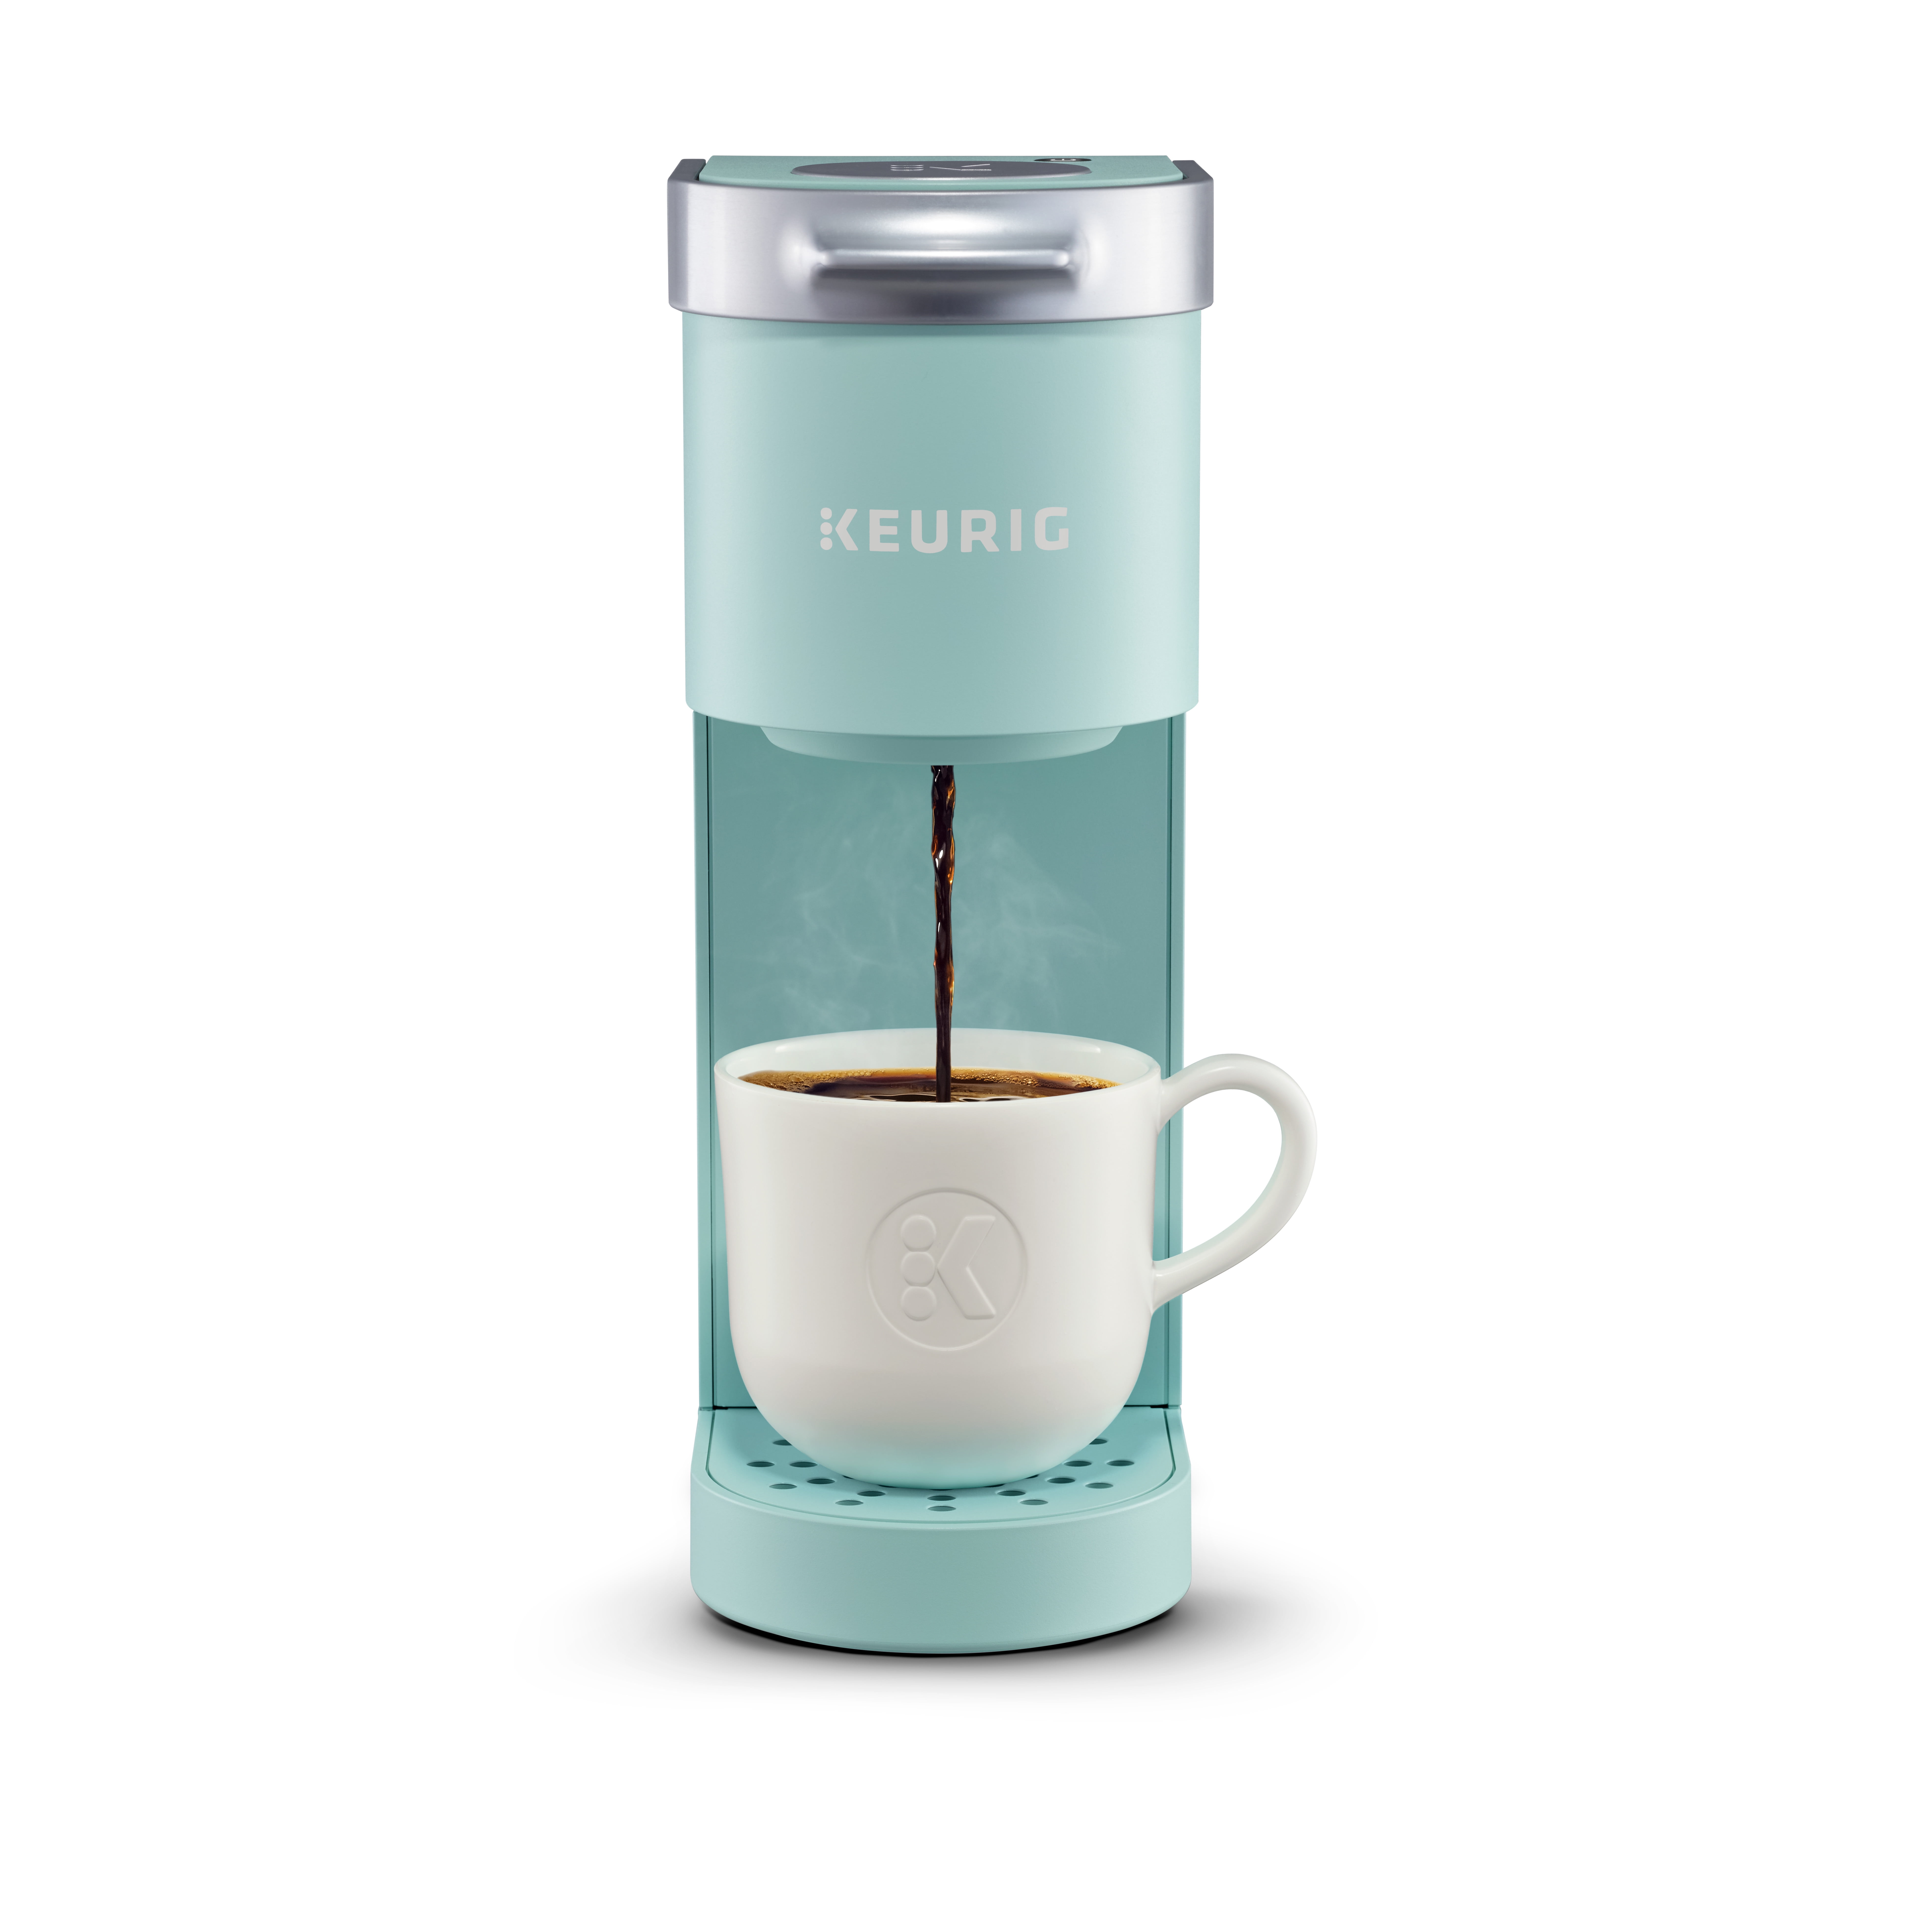 Details about   Keurig K10 Mini Plus Teal Single Cup Coffee Maker Brewing System K-Cup 